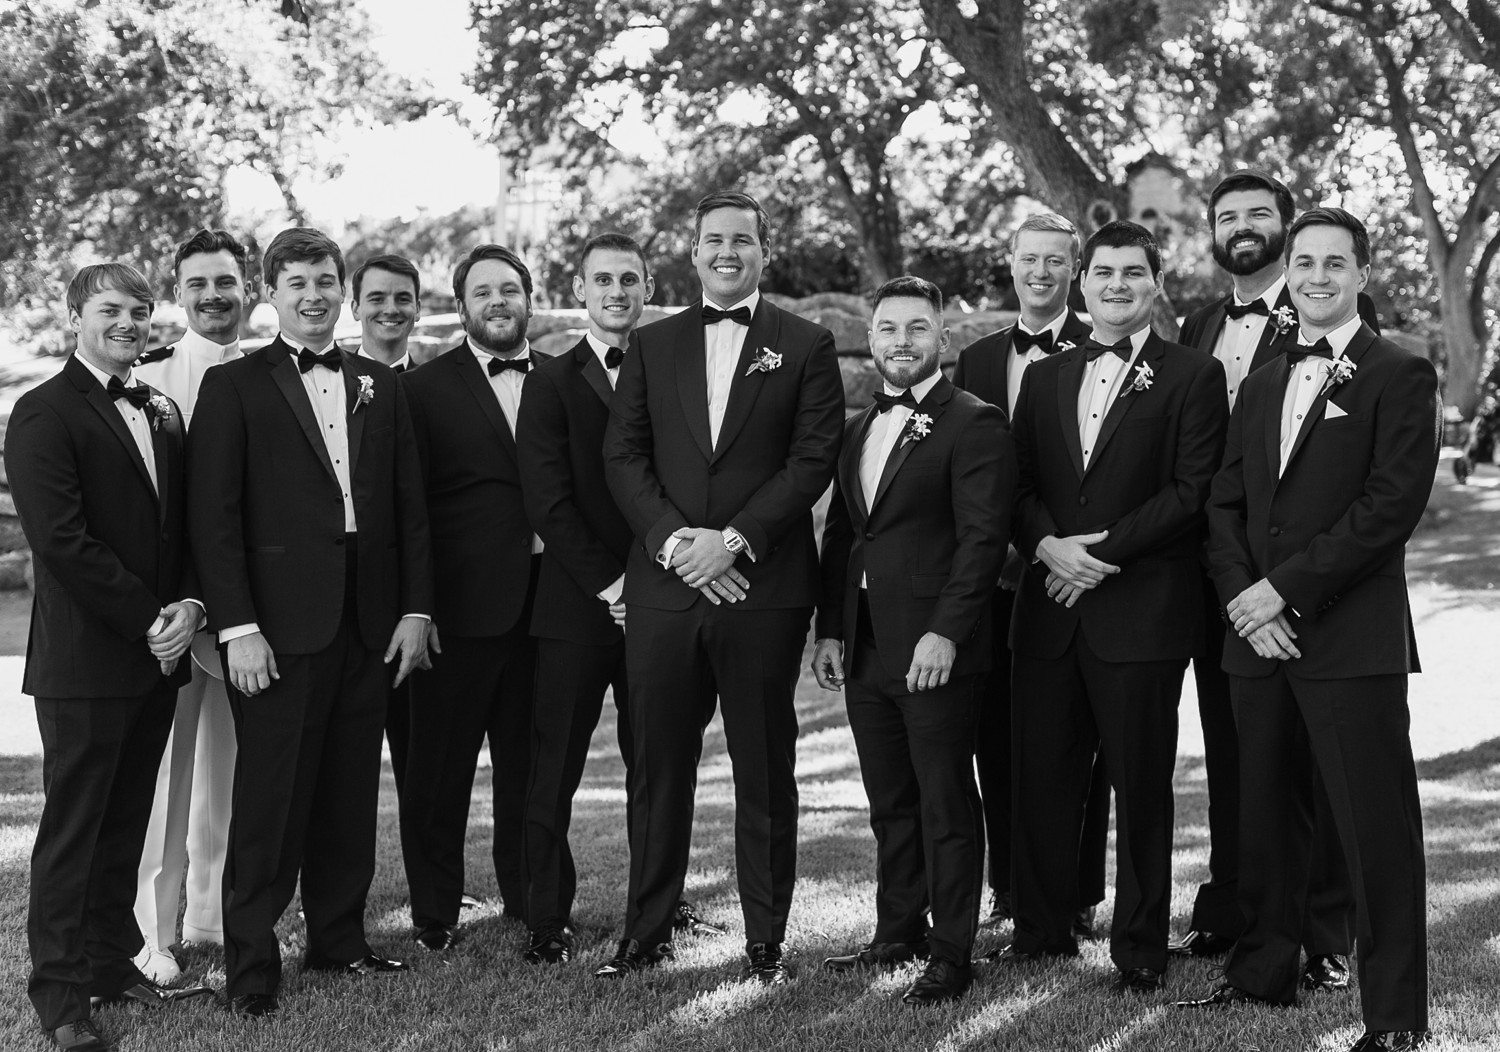 Groom and Groomsmen photos at Austin Country Club.